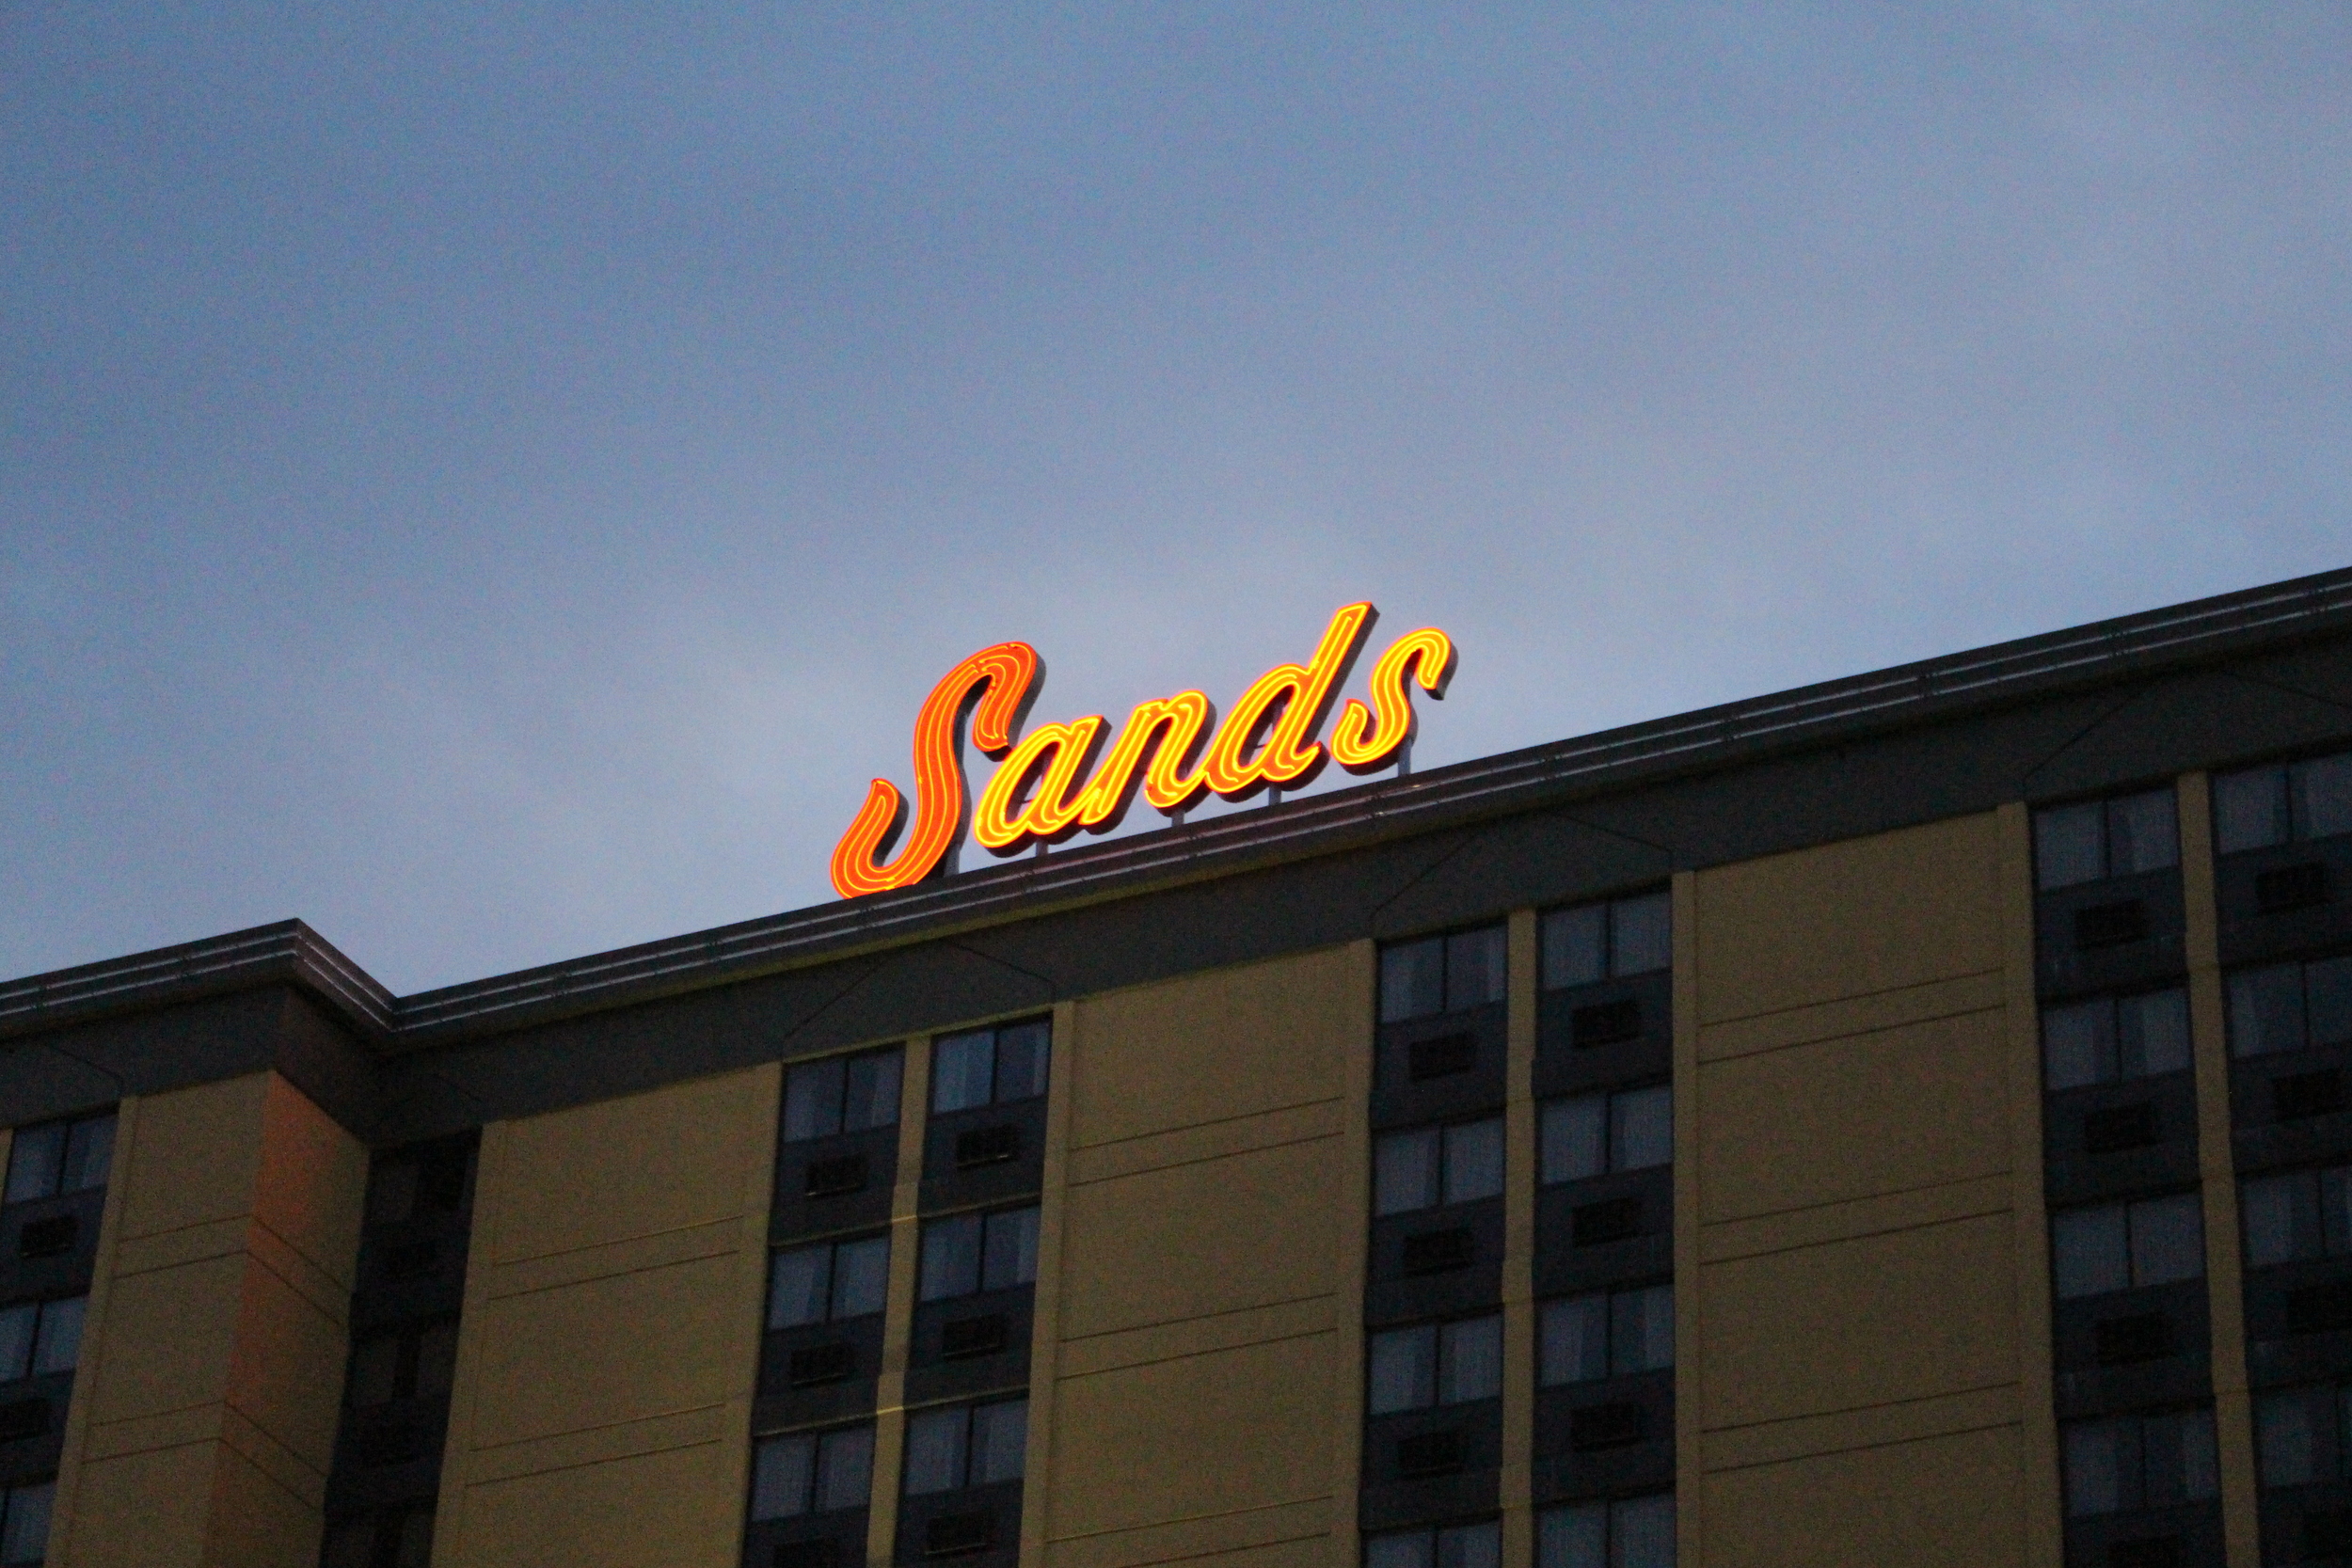 Sands Regency roof mounted sign, Reno, Nevada: photographic print